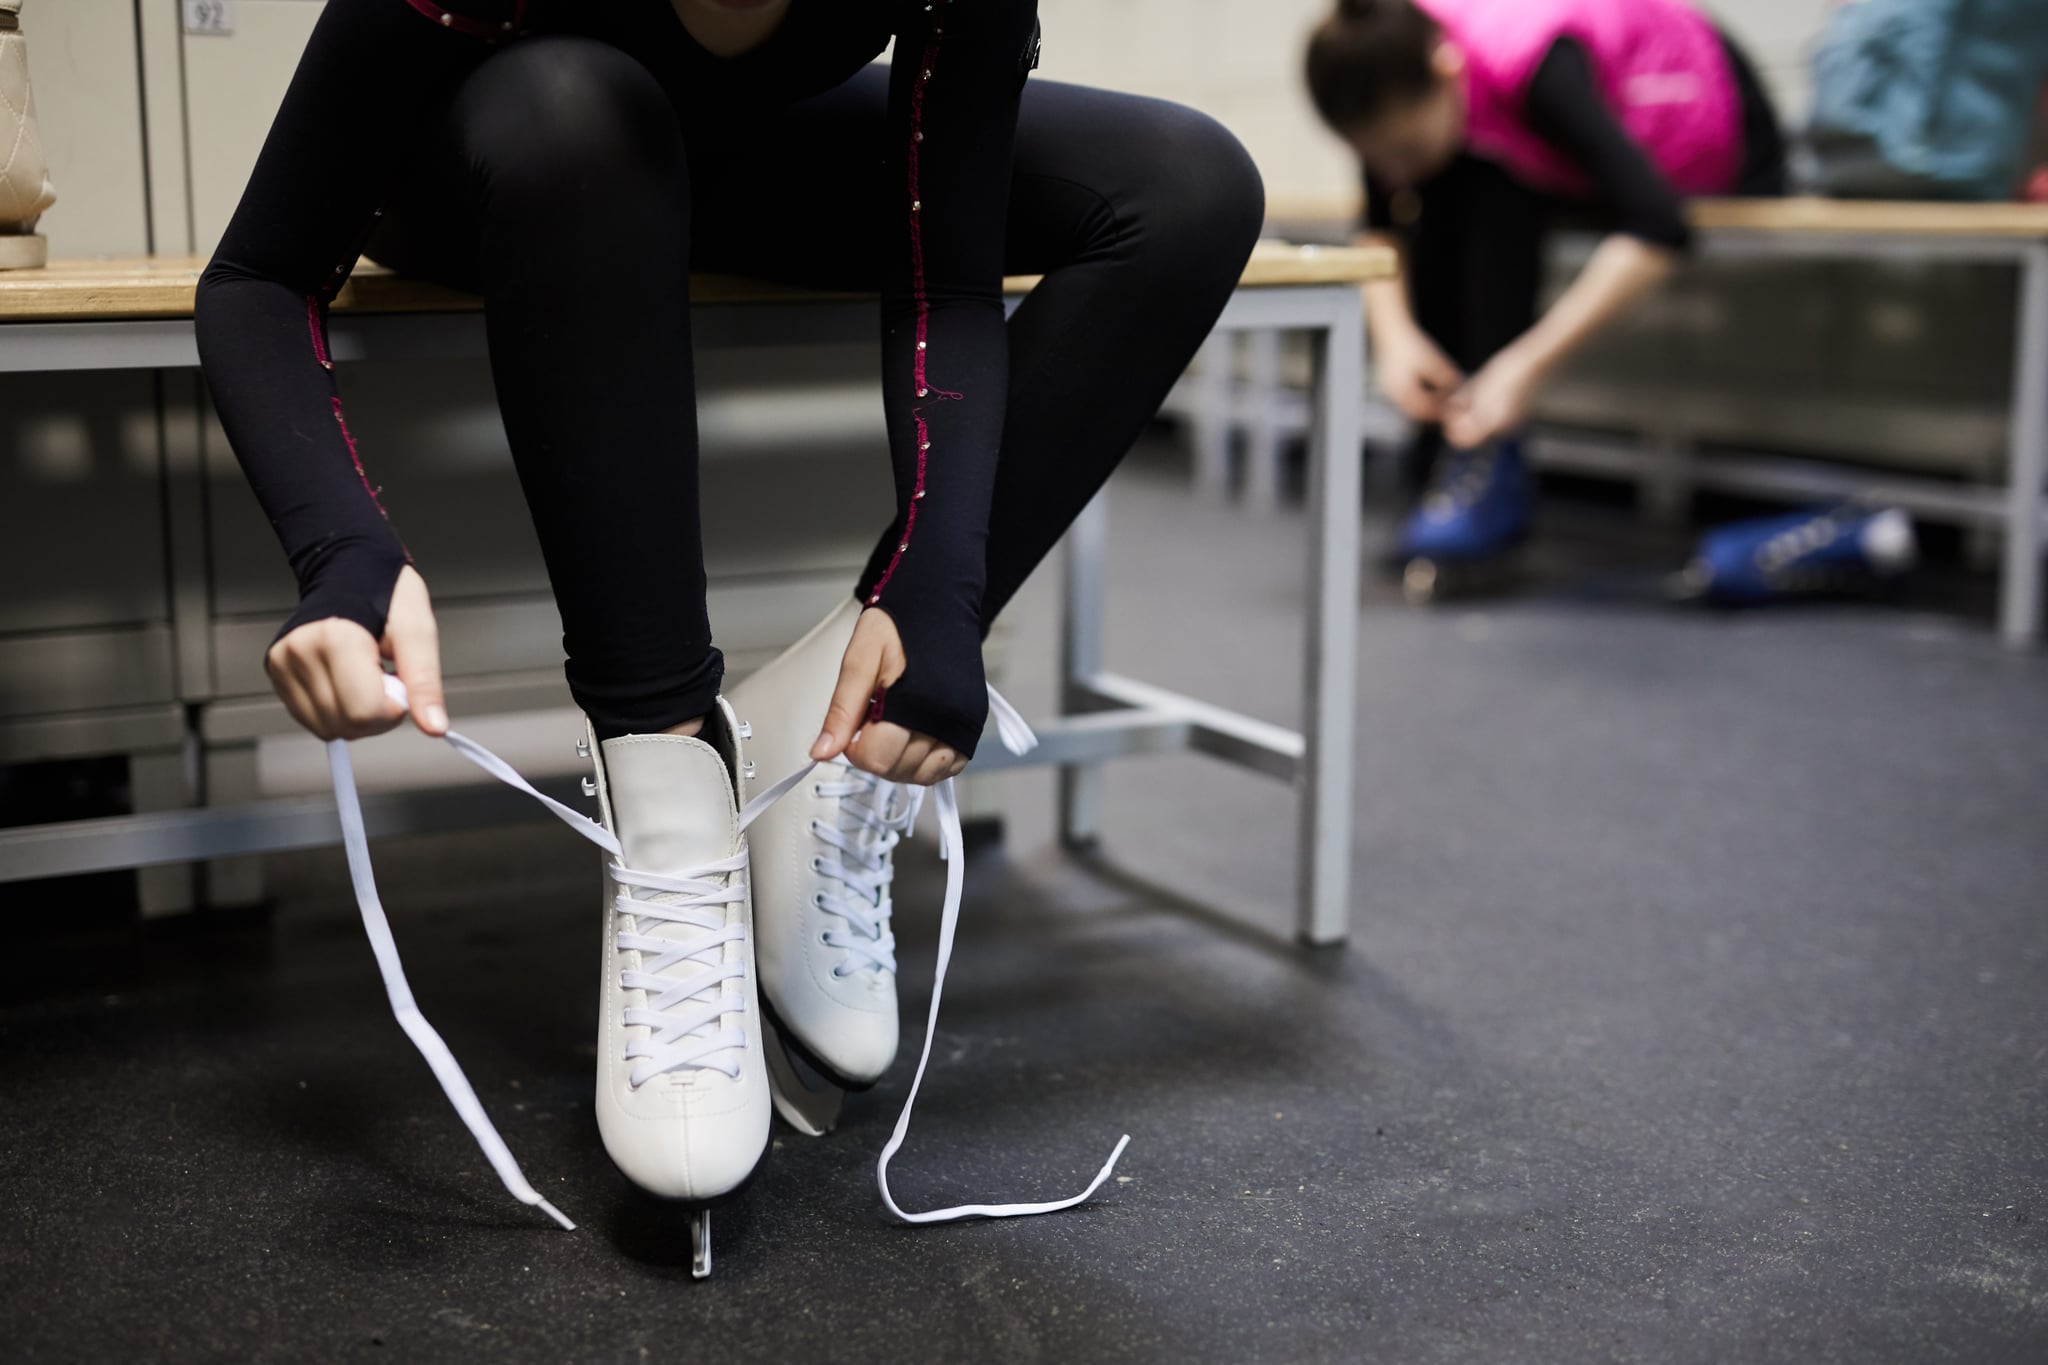 Portrait of unrecognisable girl tying skating shoe in dressing room before practice, copy space